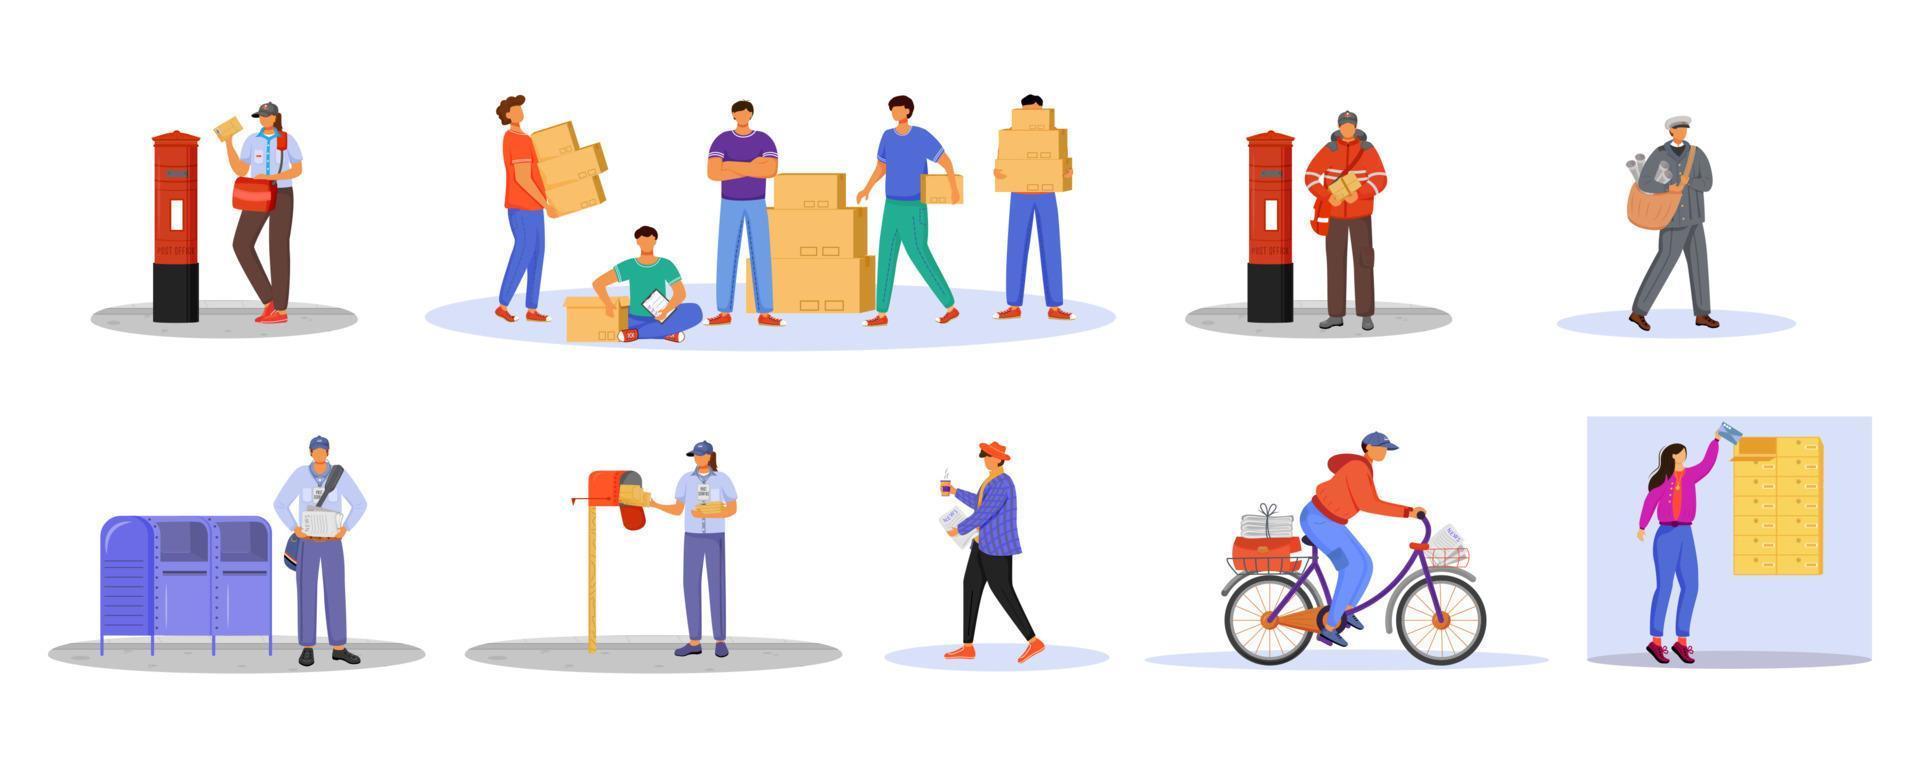 Post office male workers and loaders flat color vector illustration set. Man receives packages. Post service delivery. Boxes and parcels transportation isolated cartoon character on white background